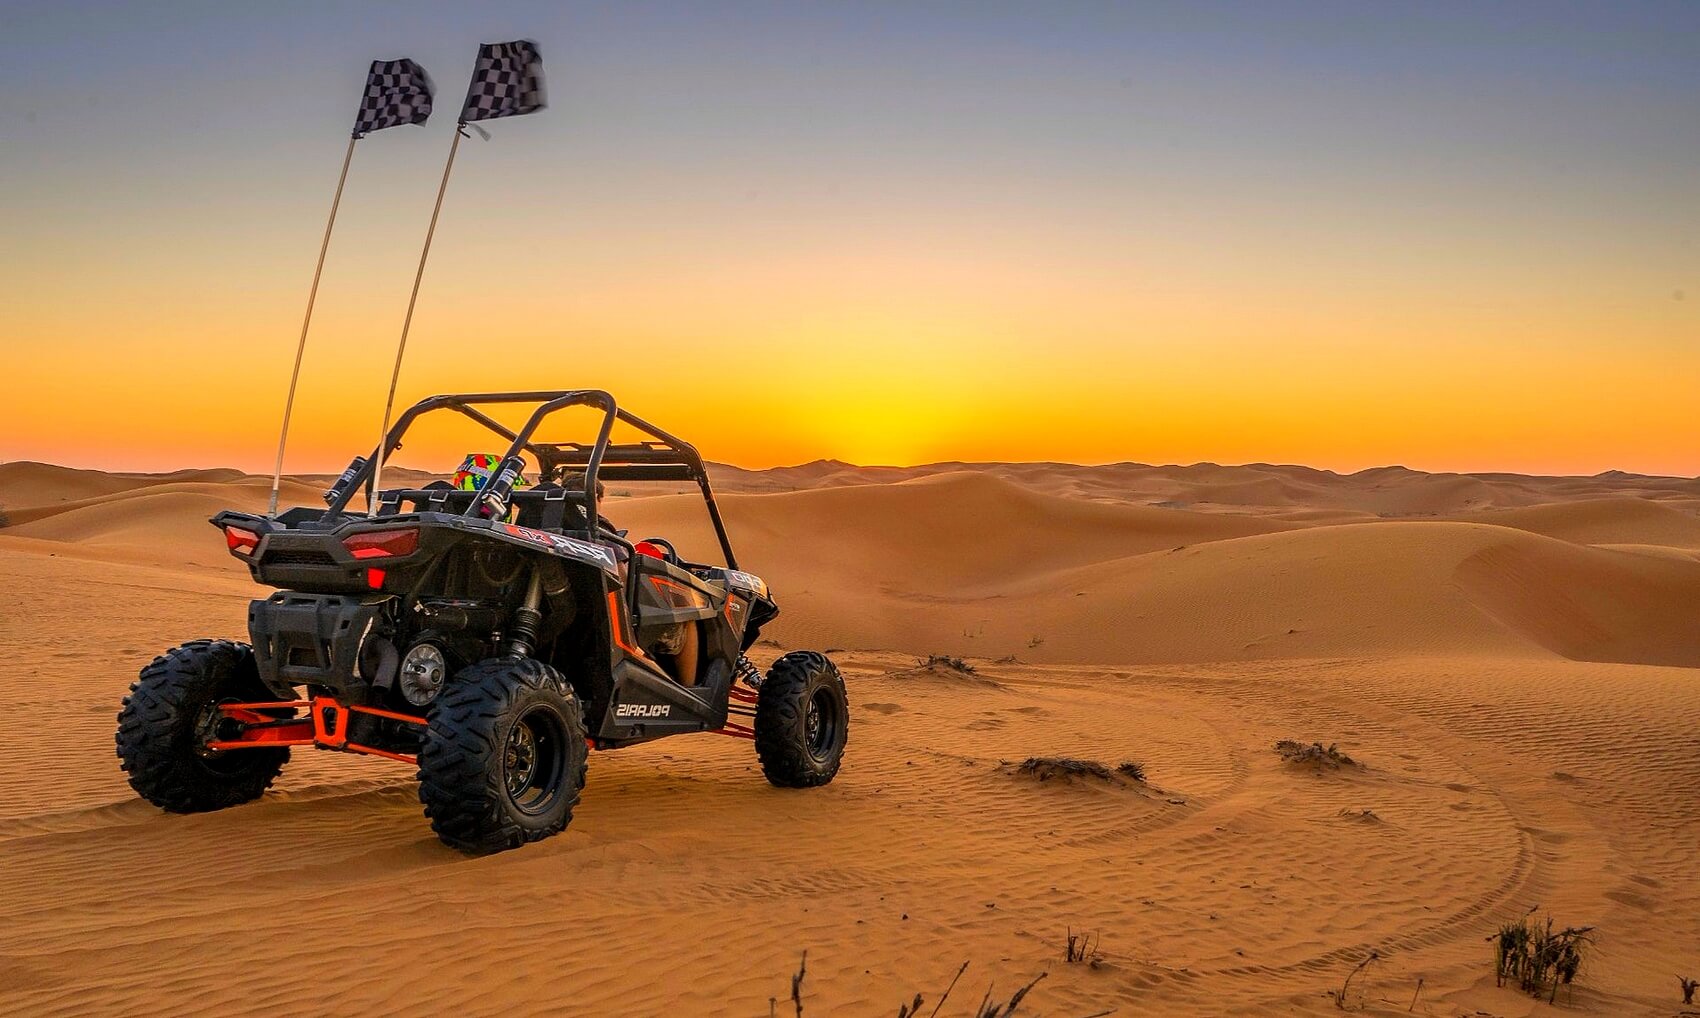 The BEST Dunes buggy excursions in Merzouga desert